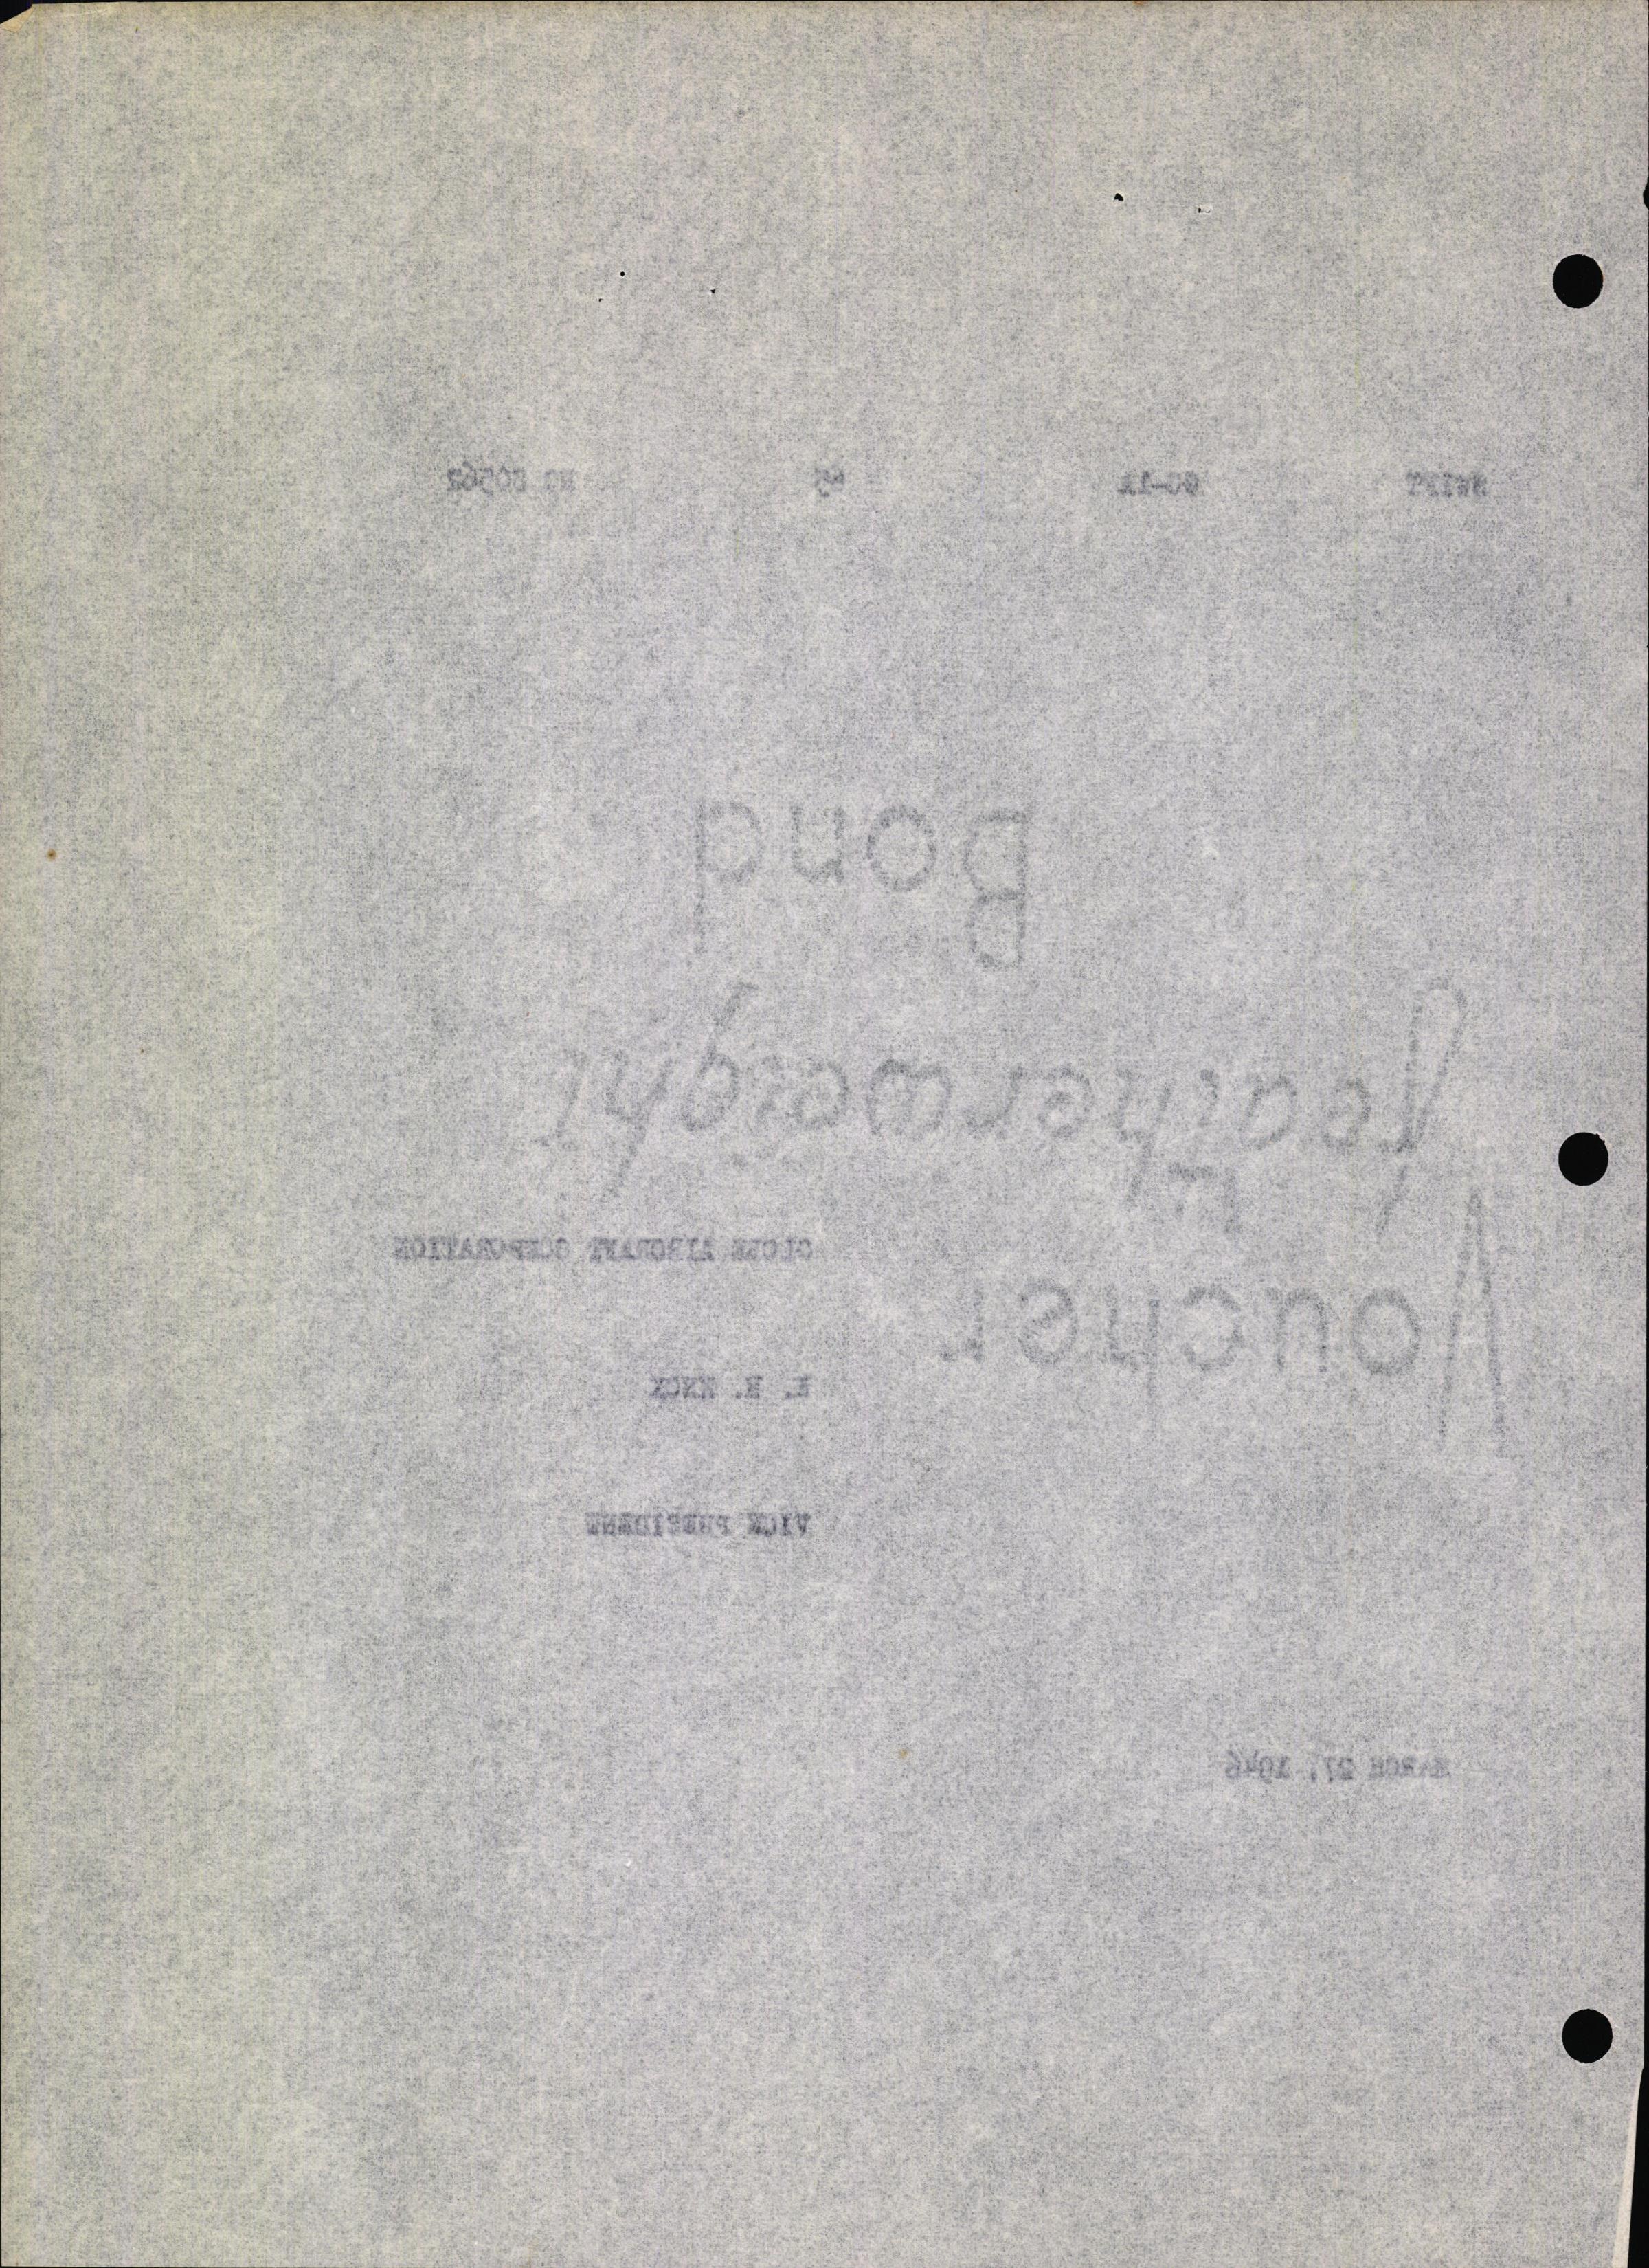 Sample page 8 from AirCorps Library document: Technical Information for Serial Number 65